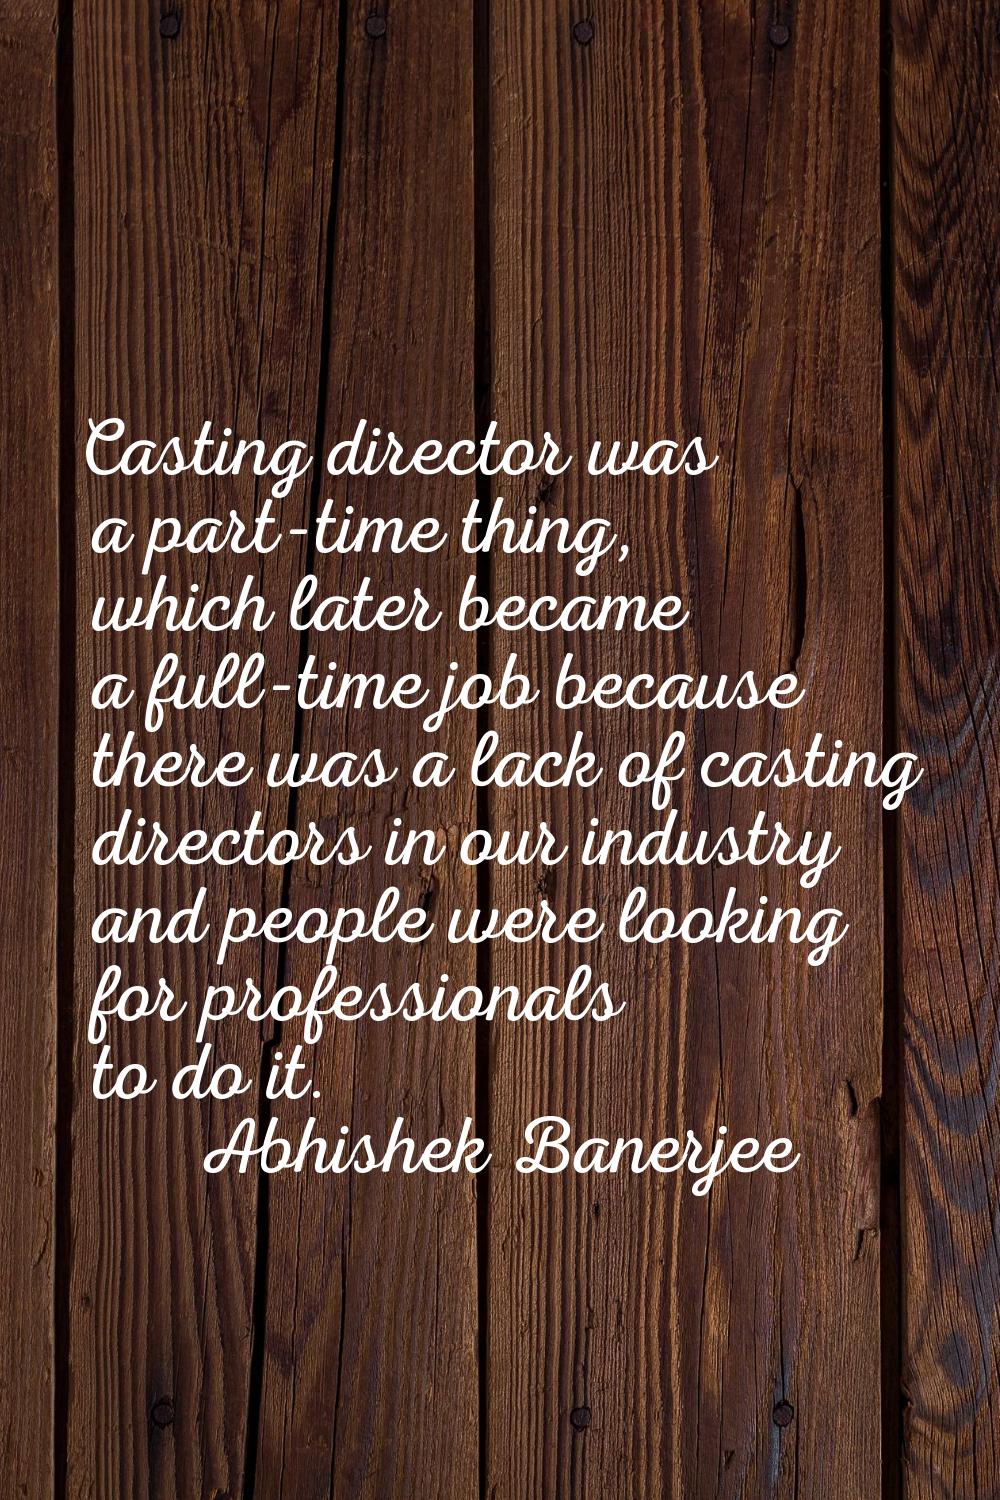 Casting director was a part-time thing, which later became a full-time job because there was a lack